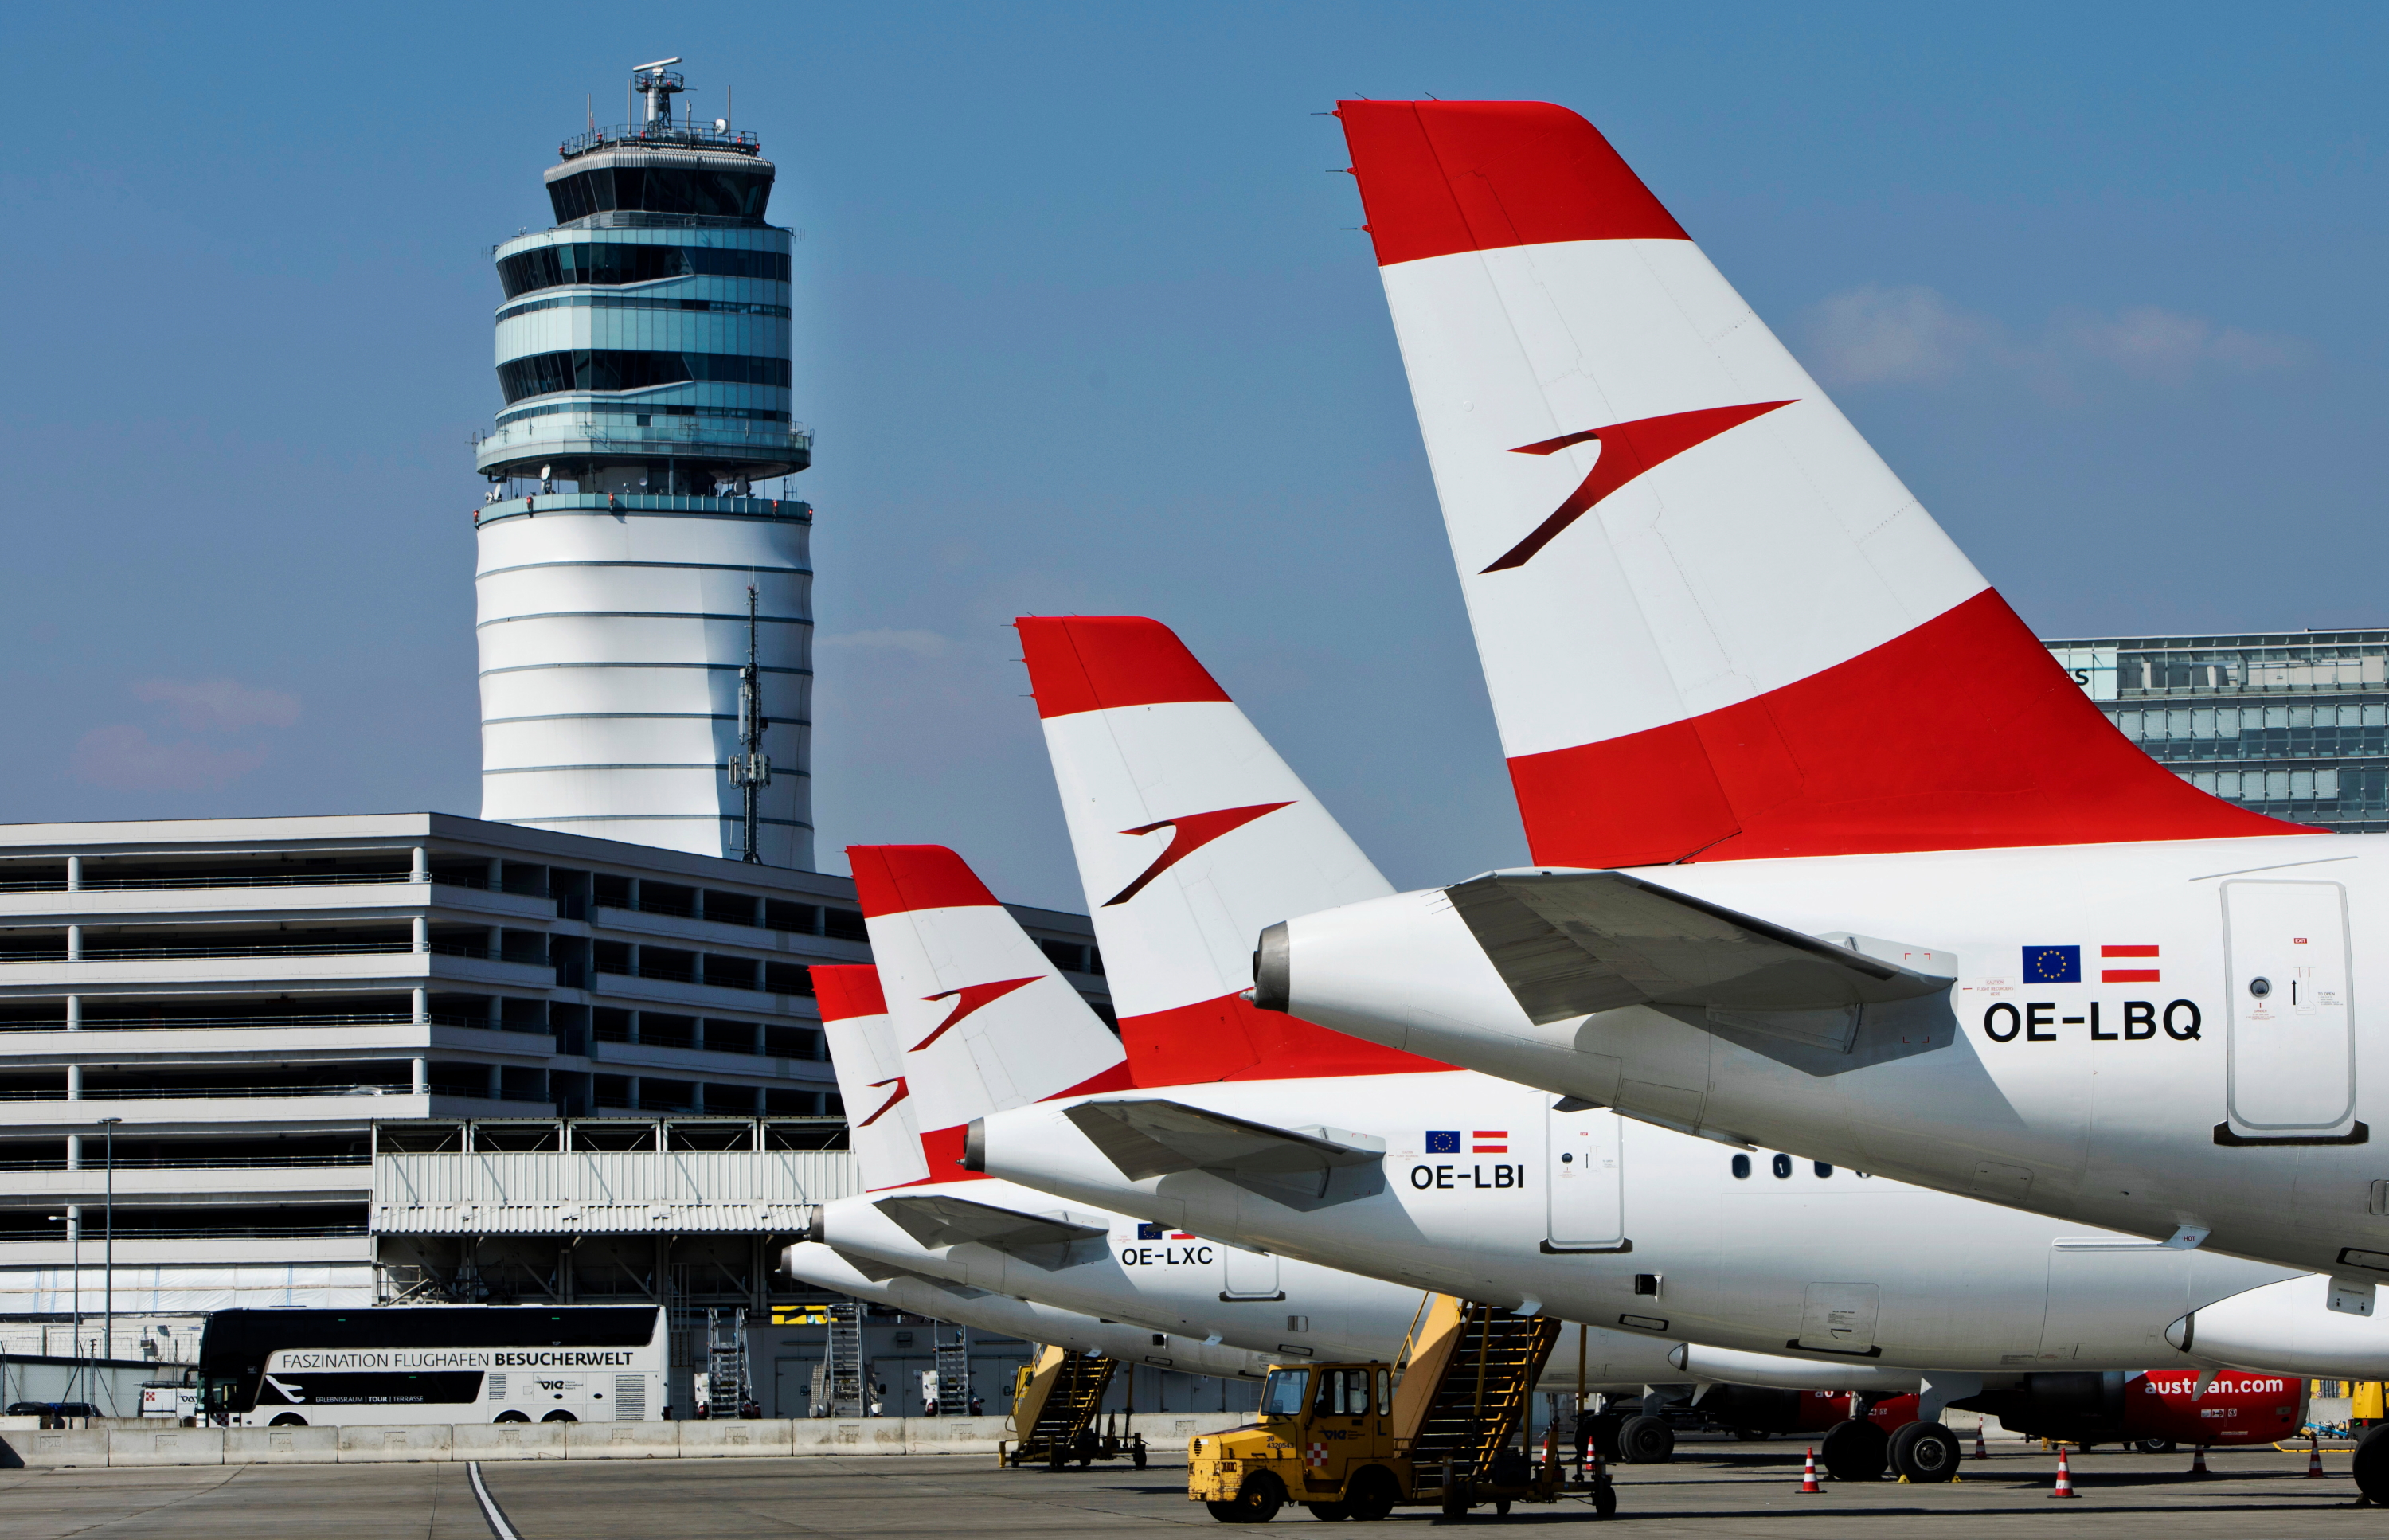 Austrian Airlines has unveiled plans to increase flights to Tokyo and the USA, launch a Montreal service, and grow the number of flight connections to Germany. The first Austrian Airlines flight to Montreal will depart from Vienna on 29 April 2019, with daily flights scheduled to the Canadian metropolis. Frequencies to Tokyo will be increased following the successful resumption of flights in 2018. One Austrian Airlines aircraft will take off for Japan each day in the summer, two more than in the previous year. Click to enlarge.